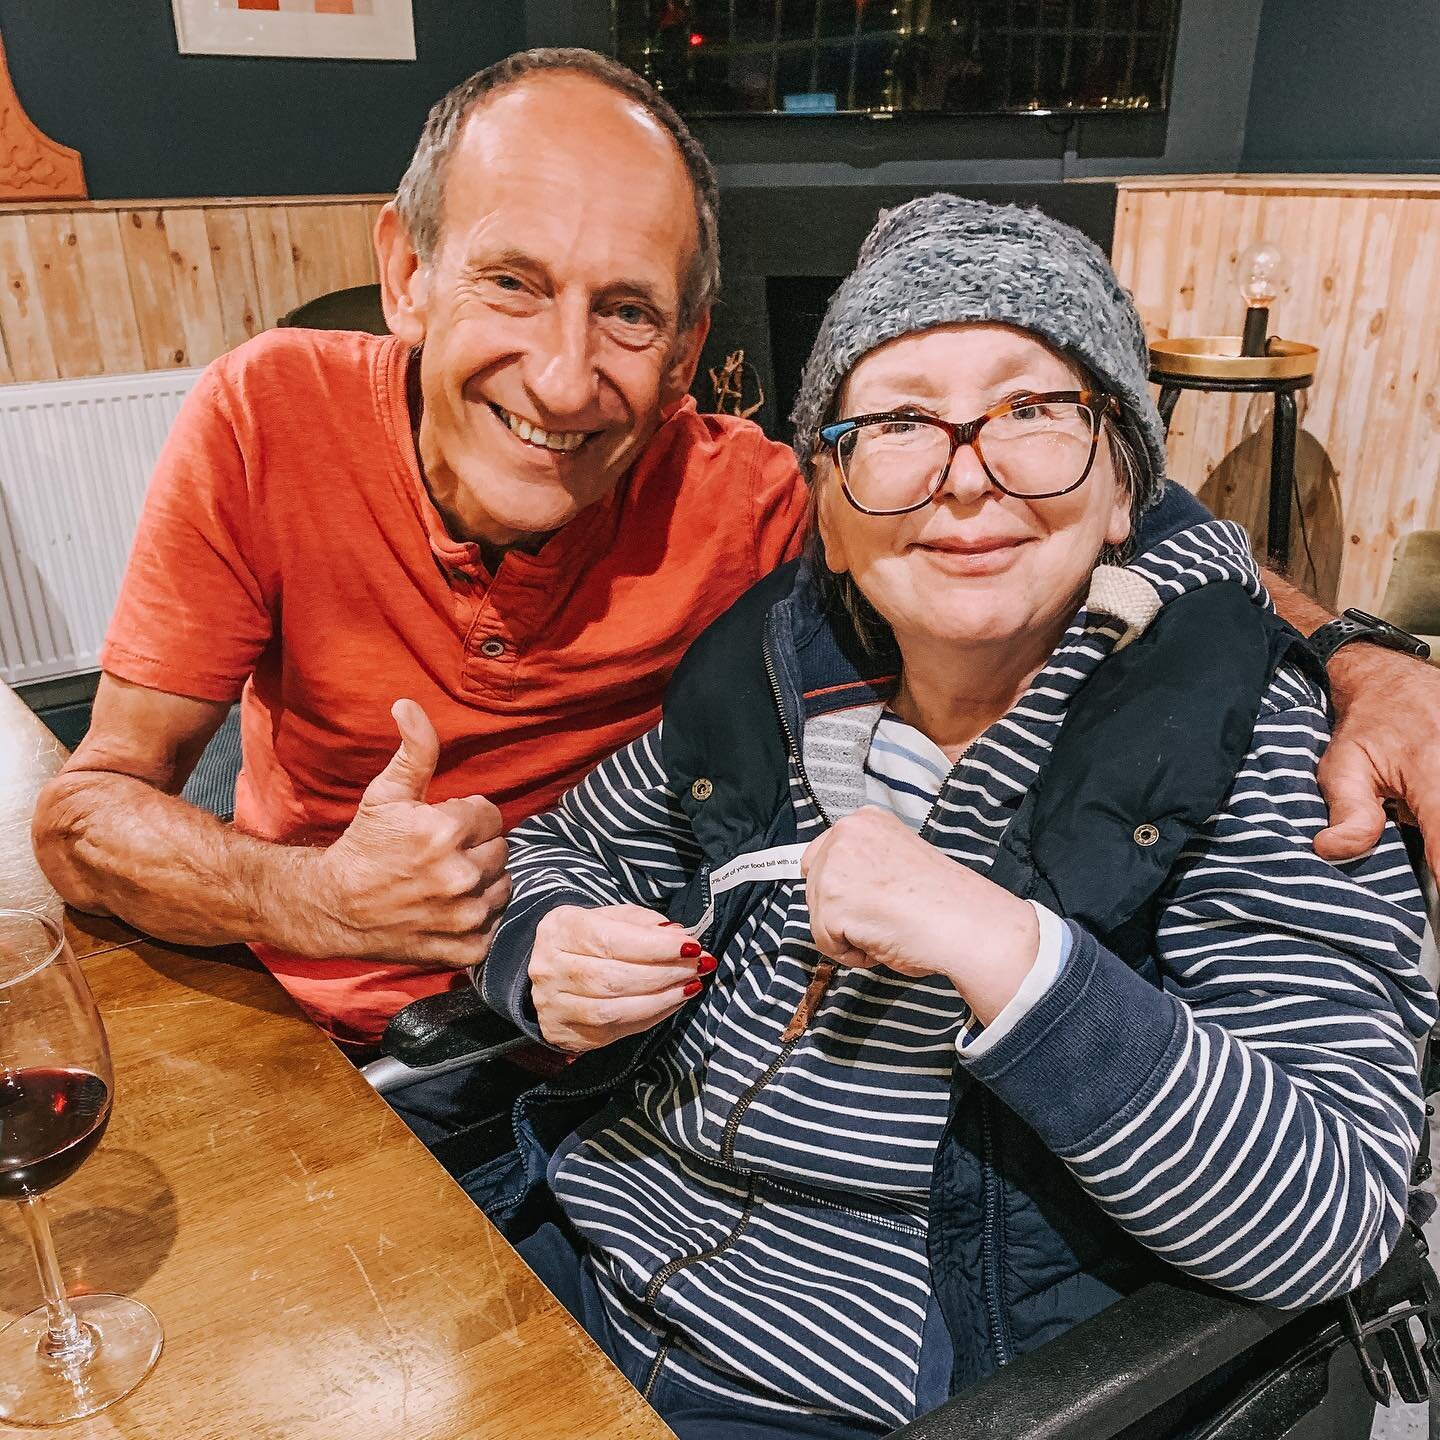 CONGRATULATIONS to today&rsquo;s winners, Richard and Mary who have won 100% off the price of their meals! 🥳🥳🥳